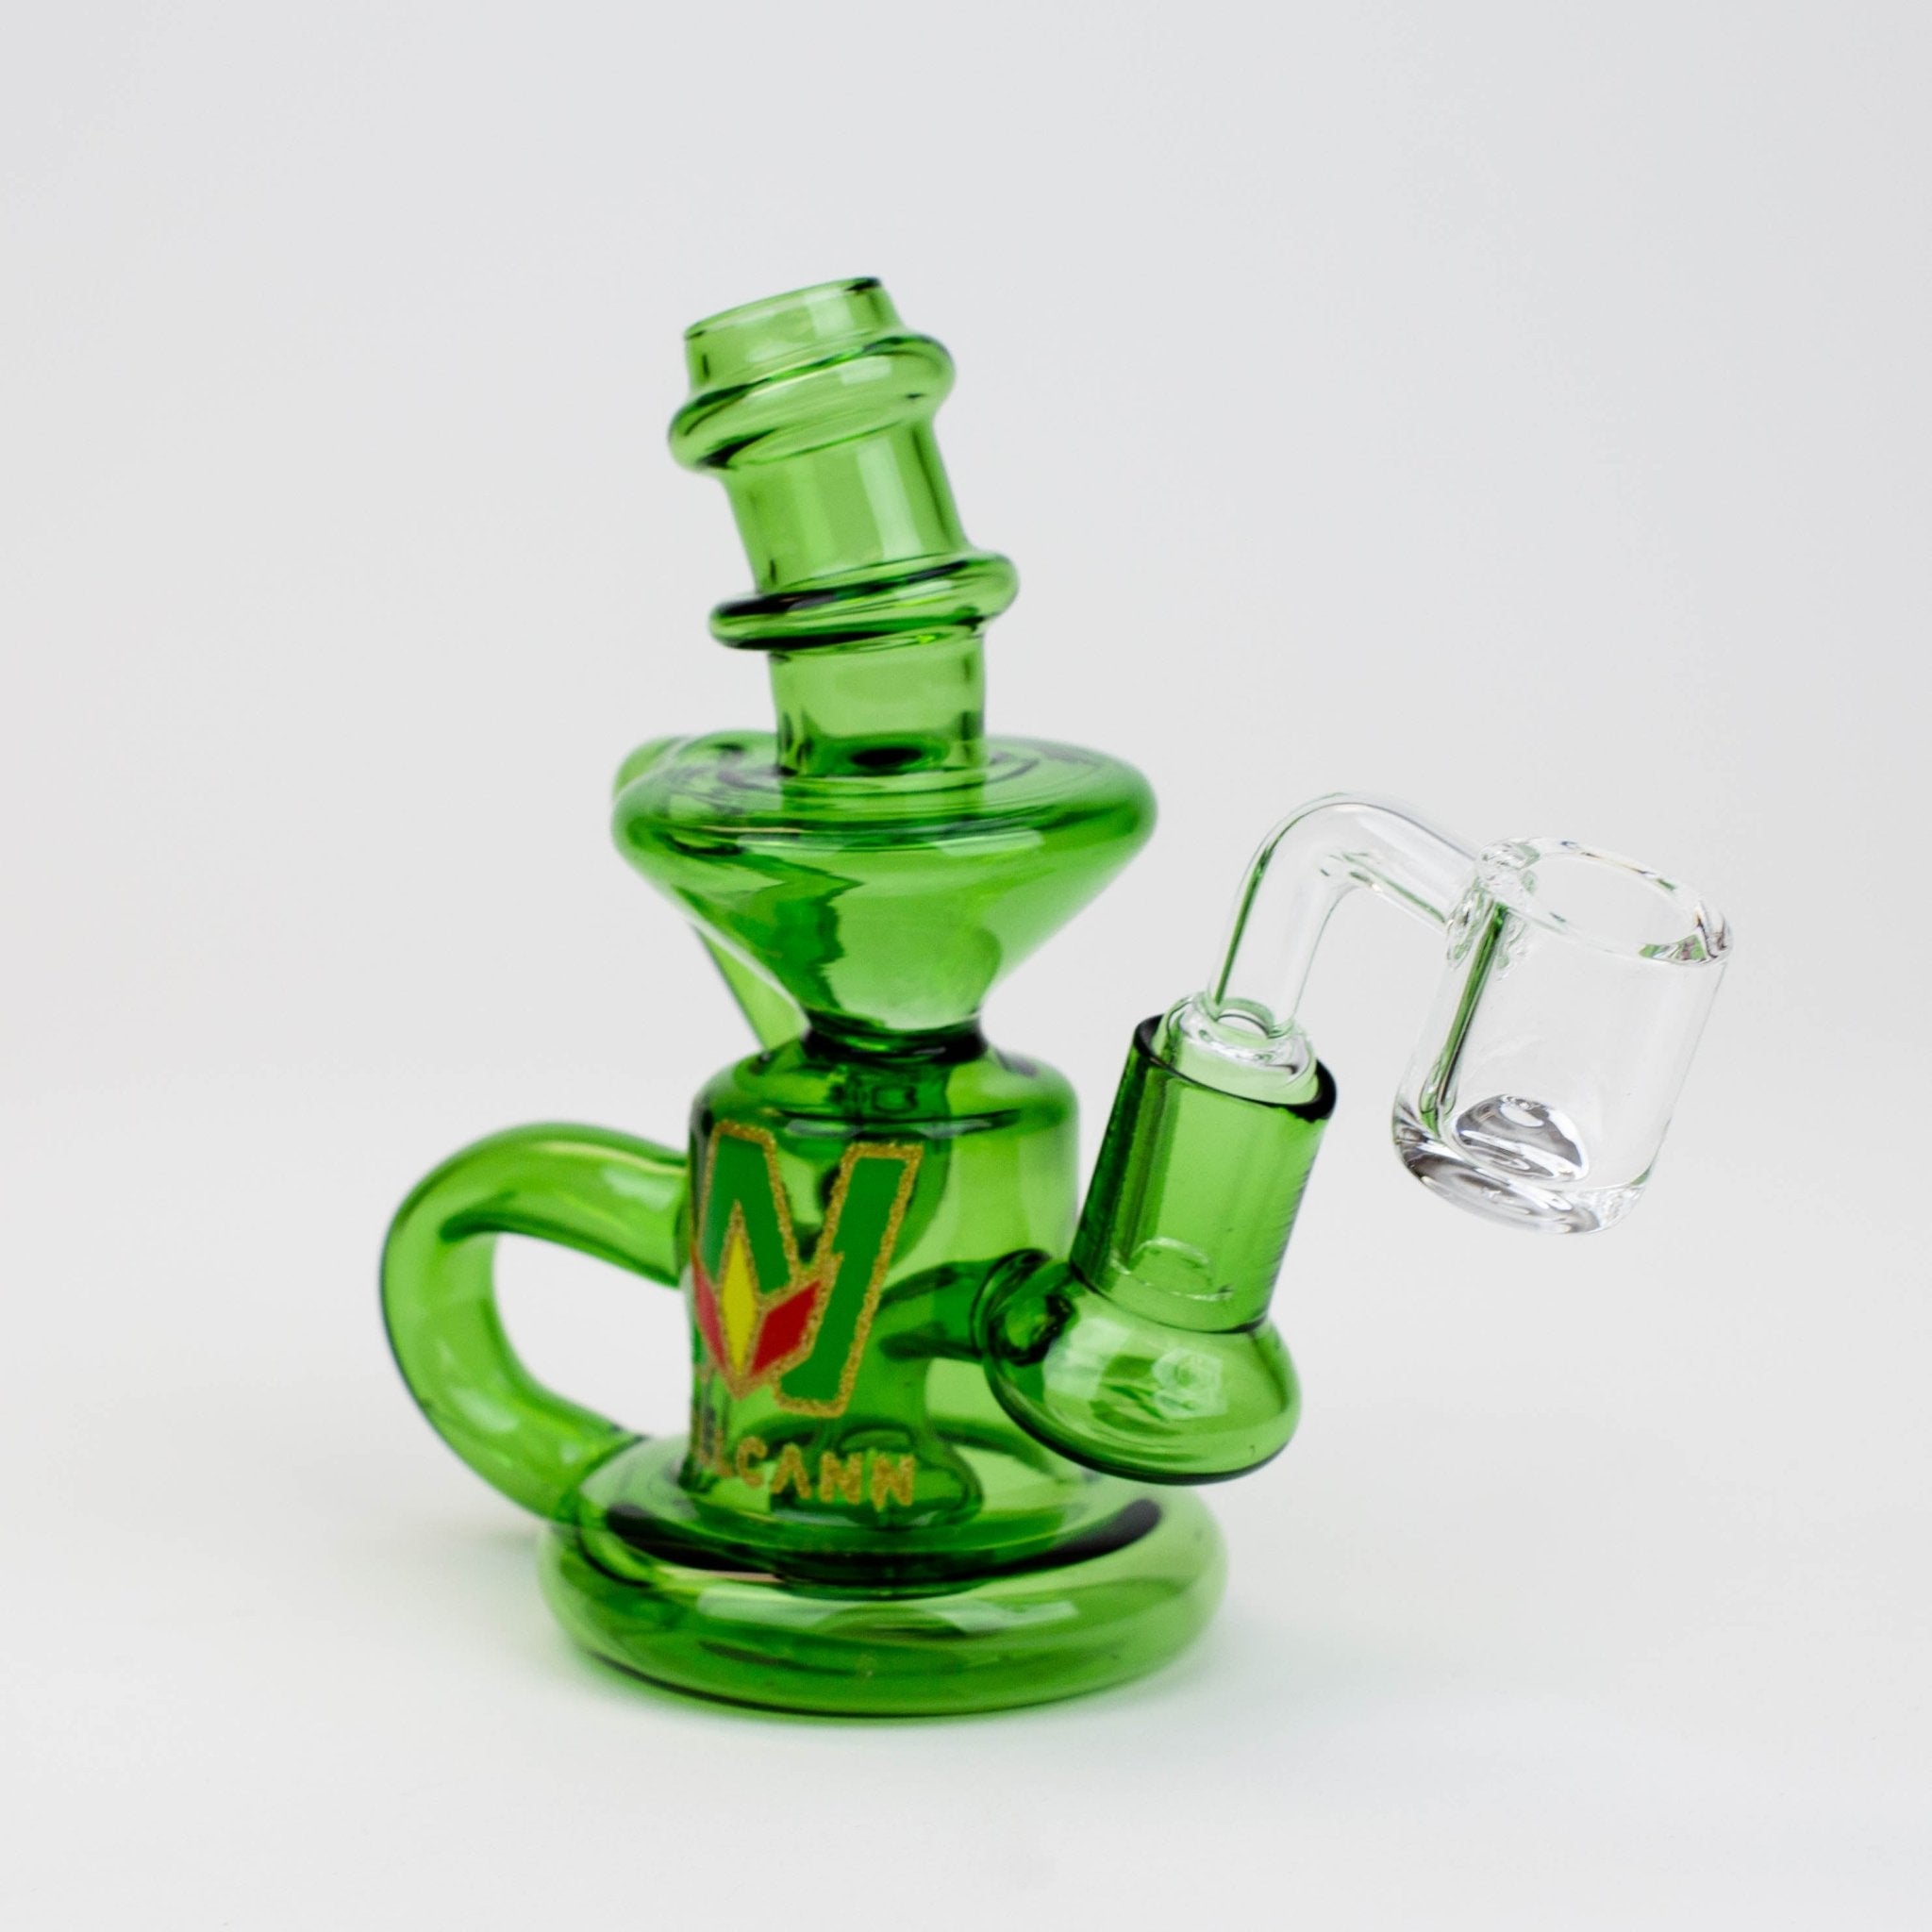 WellCann 6" Double Loop Recycler Rig w/ Banger - Glasss Station